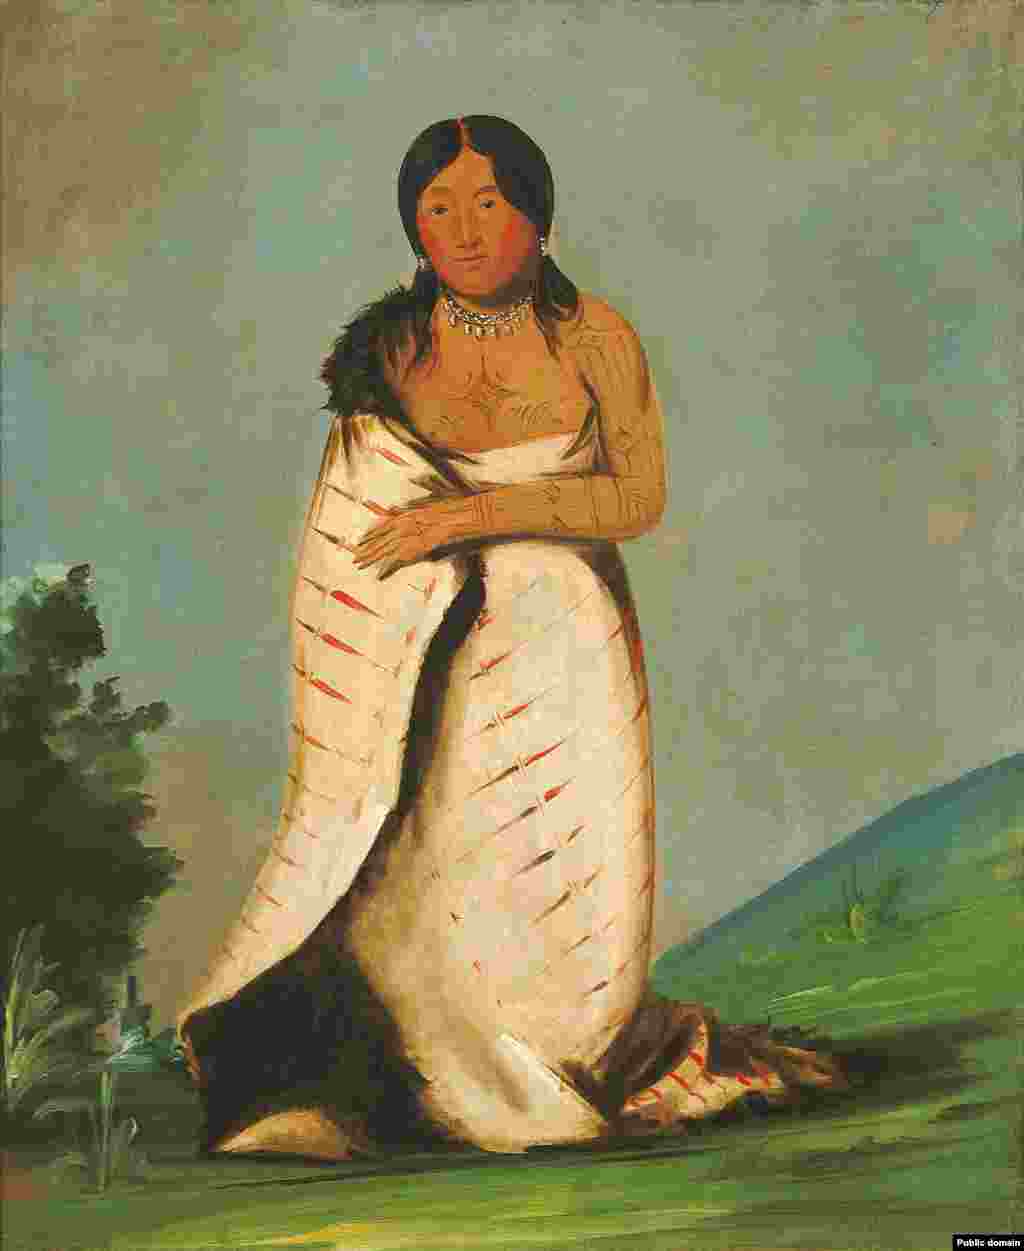 Hee-láh-dee, ("Pure Fountain), wife of Ponca leader Shoo-de-gá-cha ("The Smoke)" painted by George Catlin, 1832. 